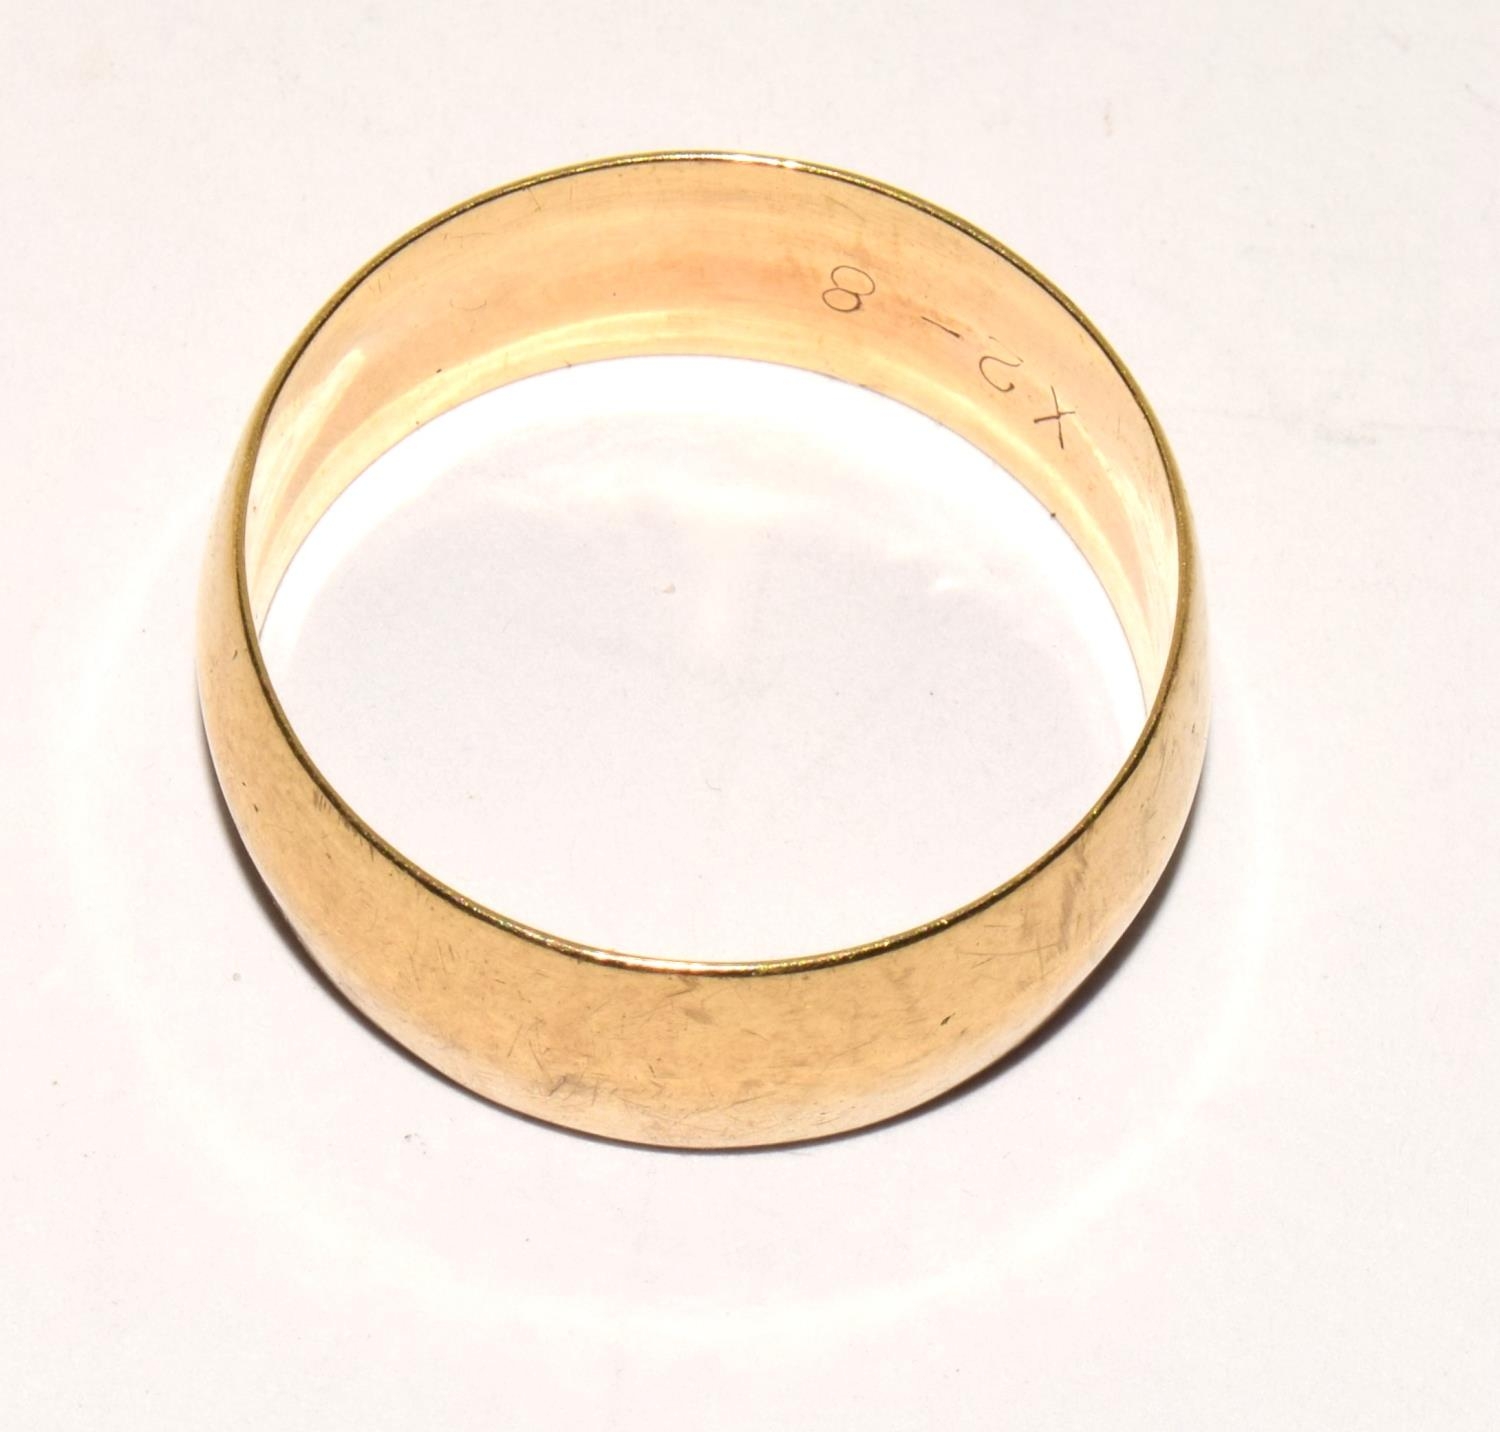 9ct gold wedding band 3.8g size R ref 64 - Image 3 of 3